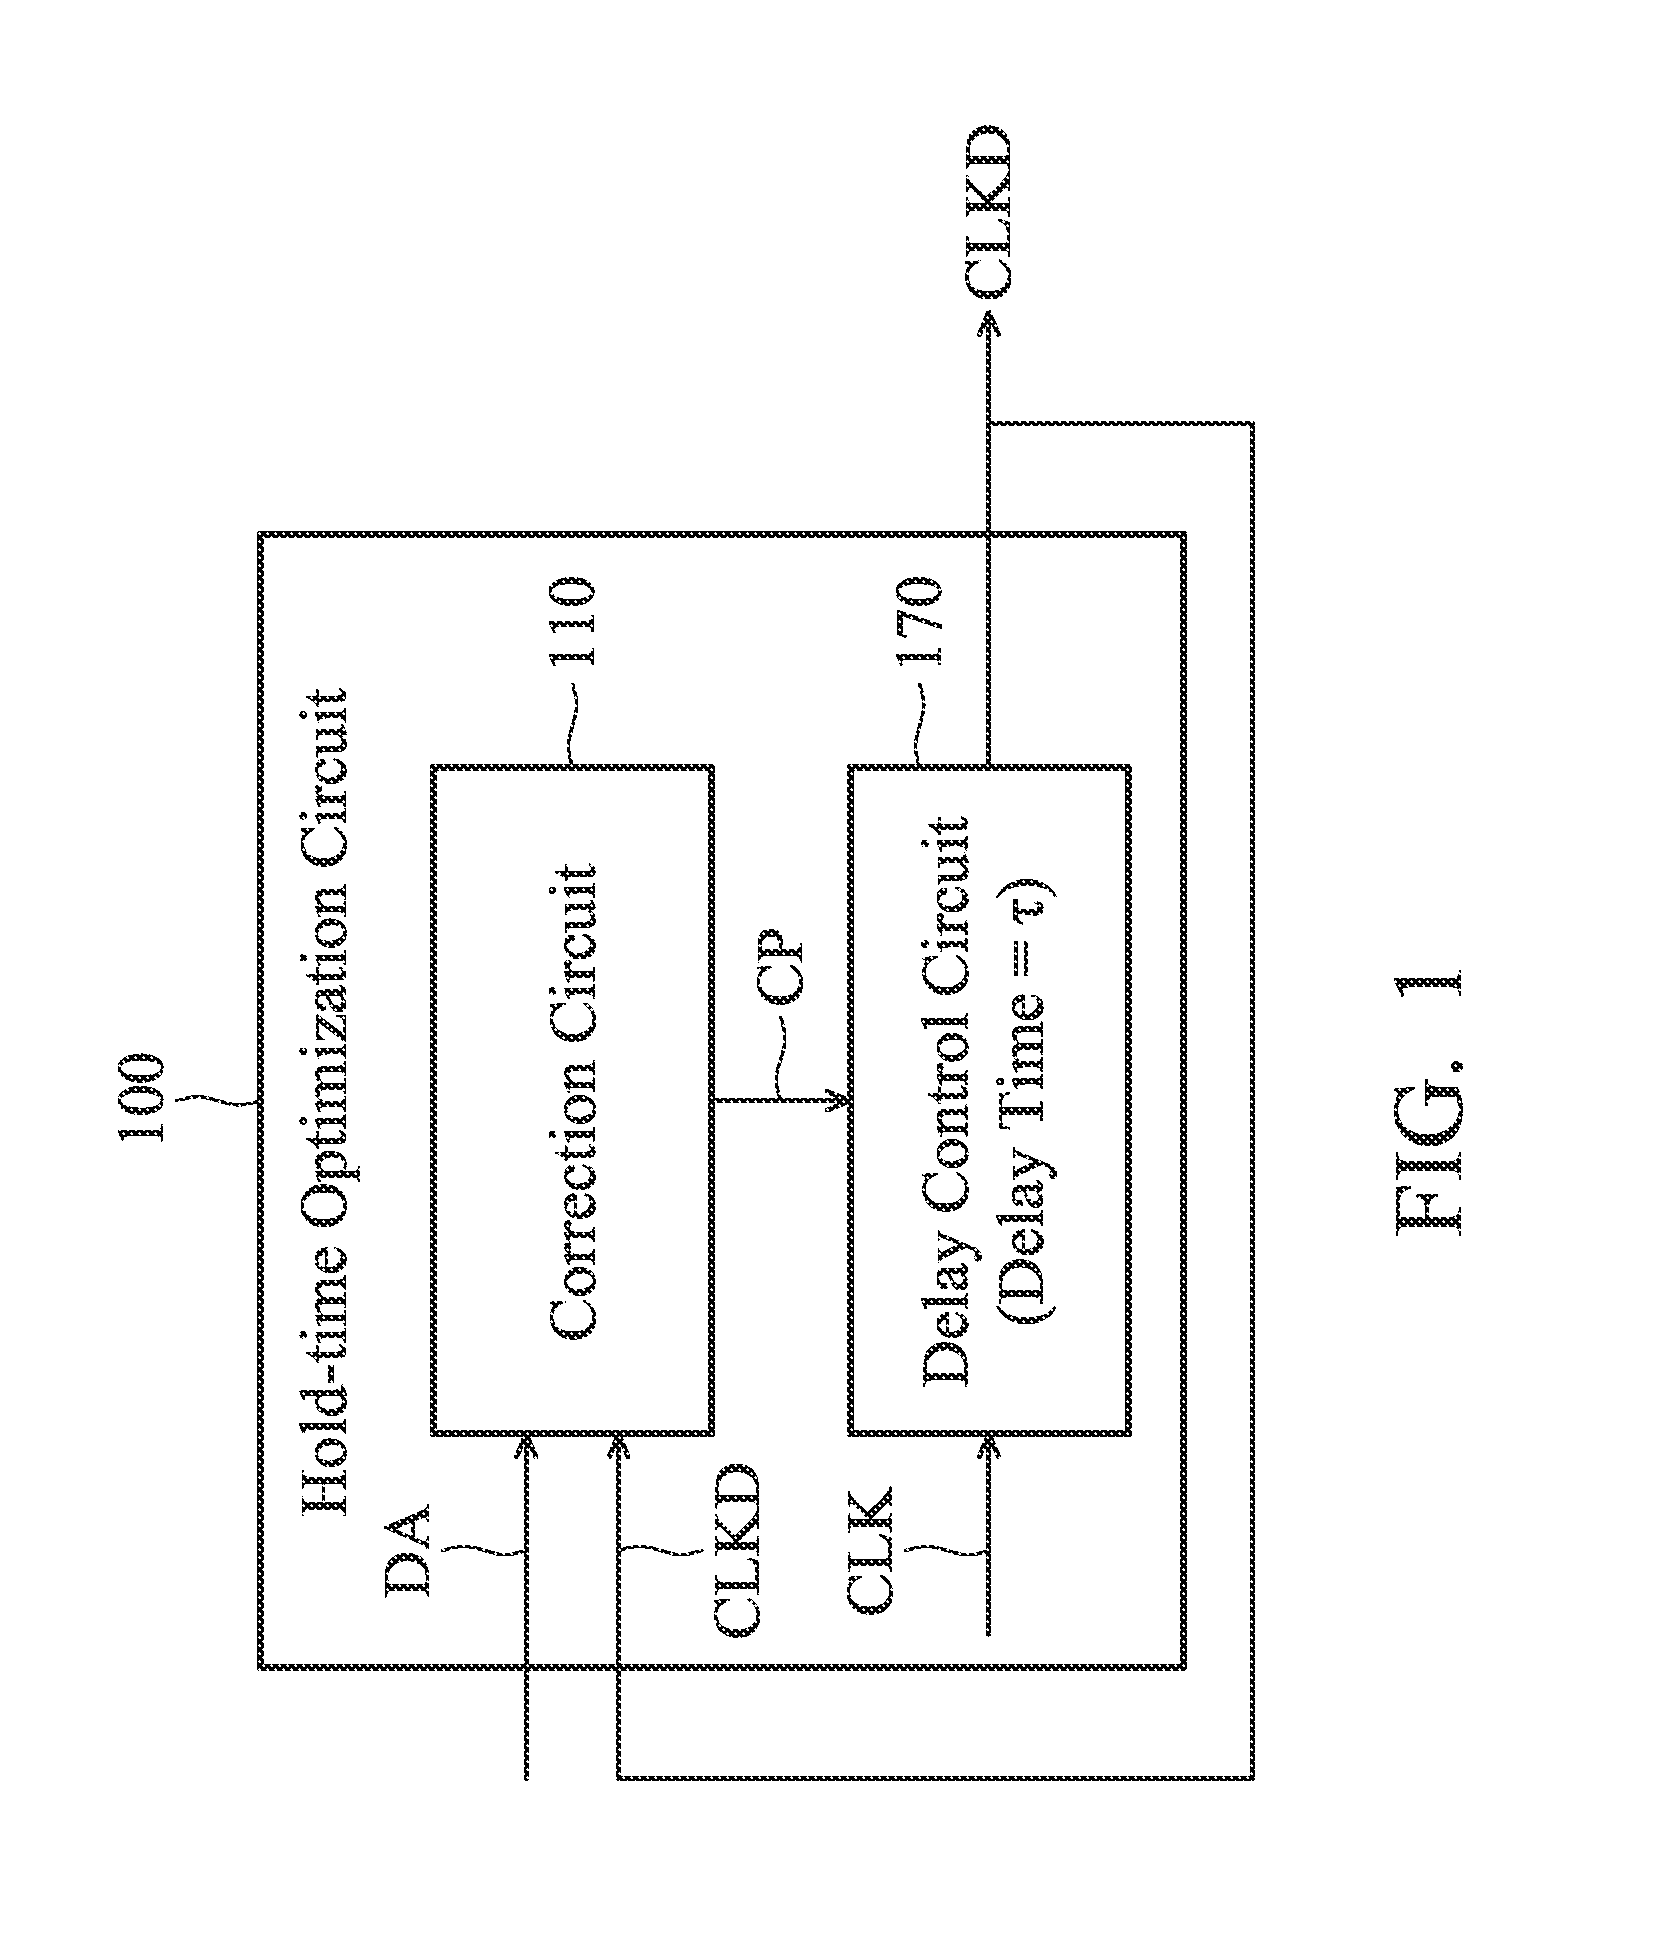 Hold-time optimization circuit and receiver with the same